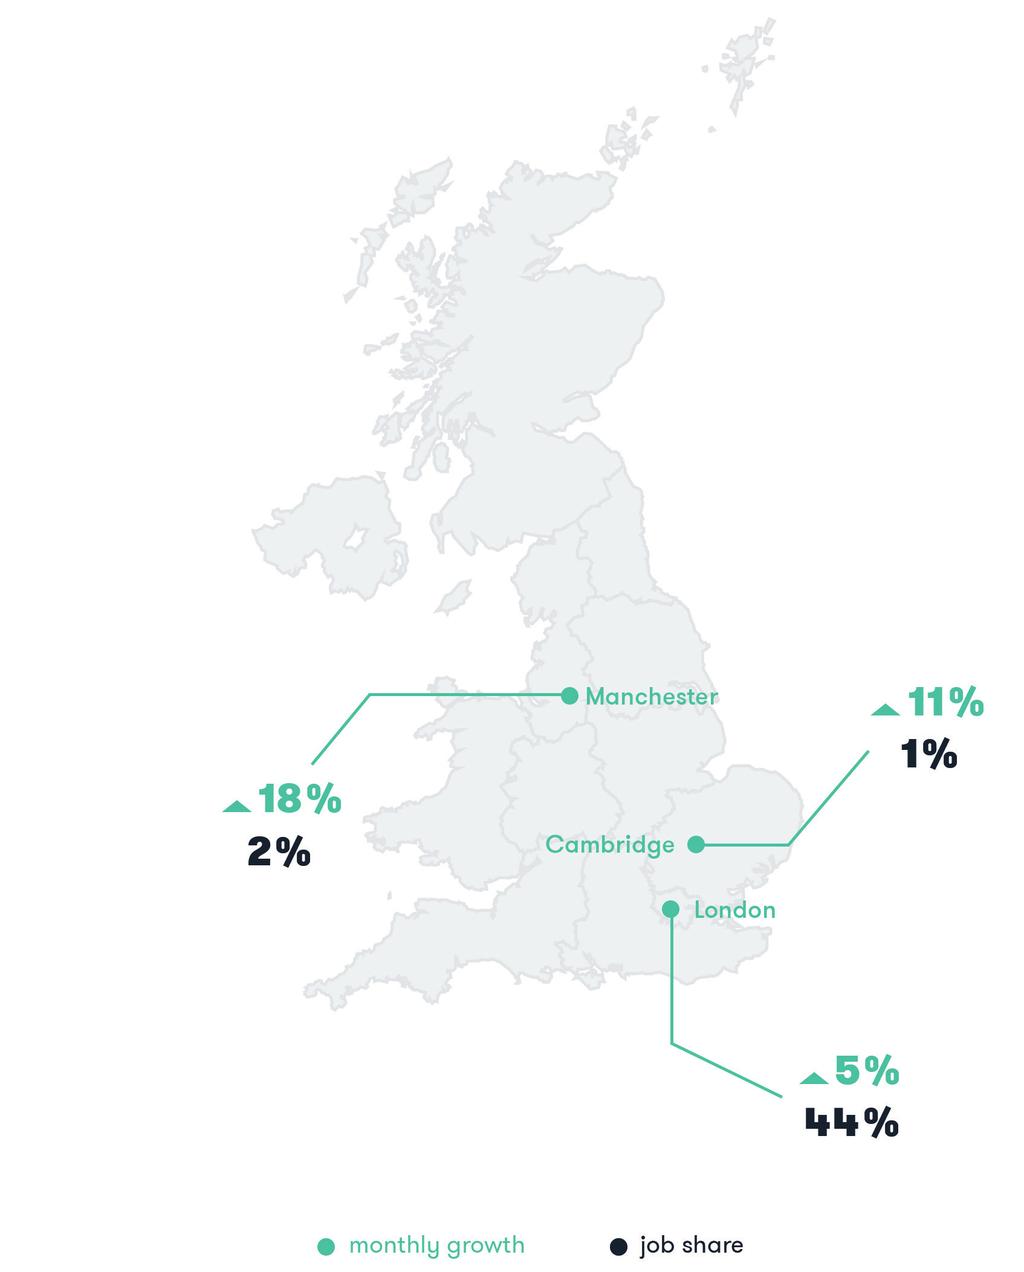 Around 49,000 vacancies have been posted with London being the location of 44% of all advertisements.